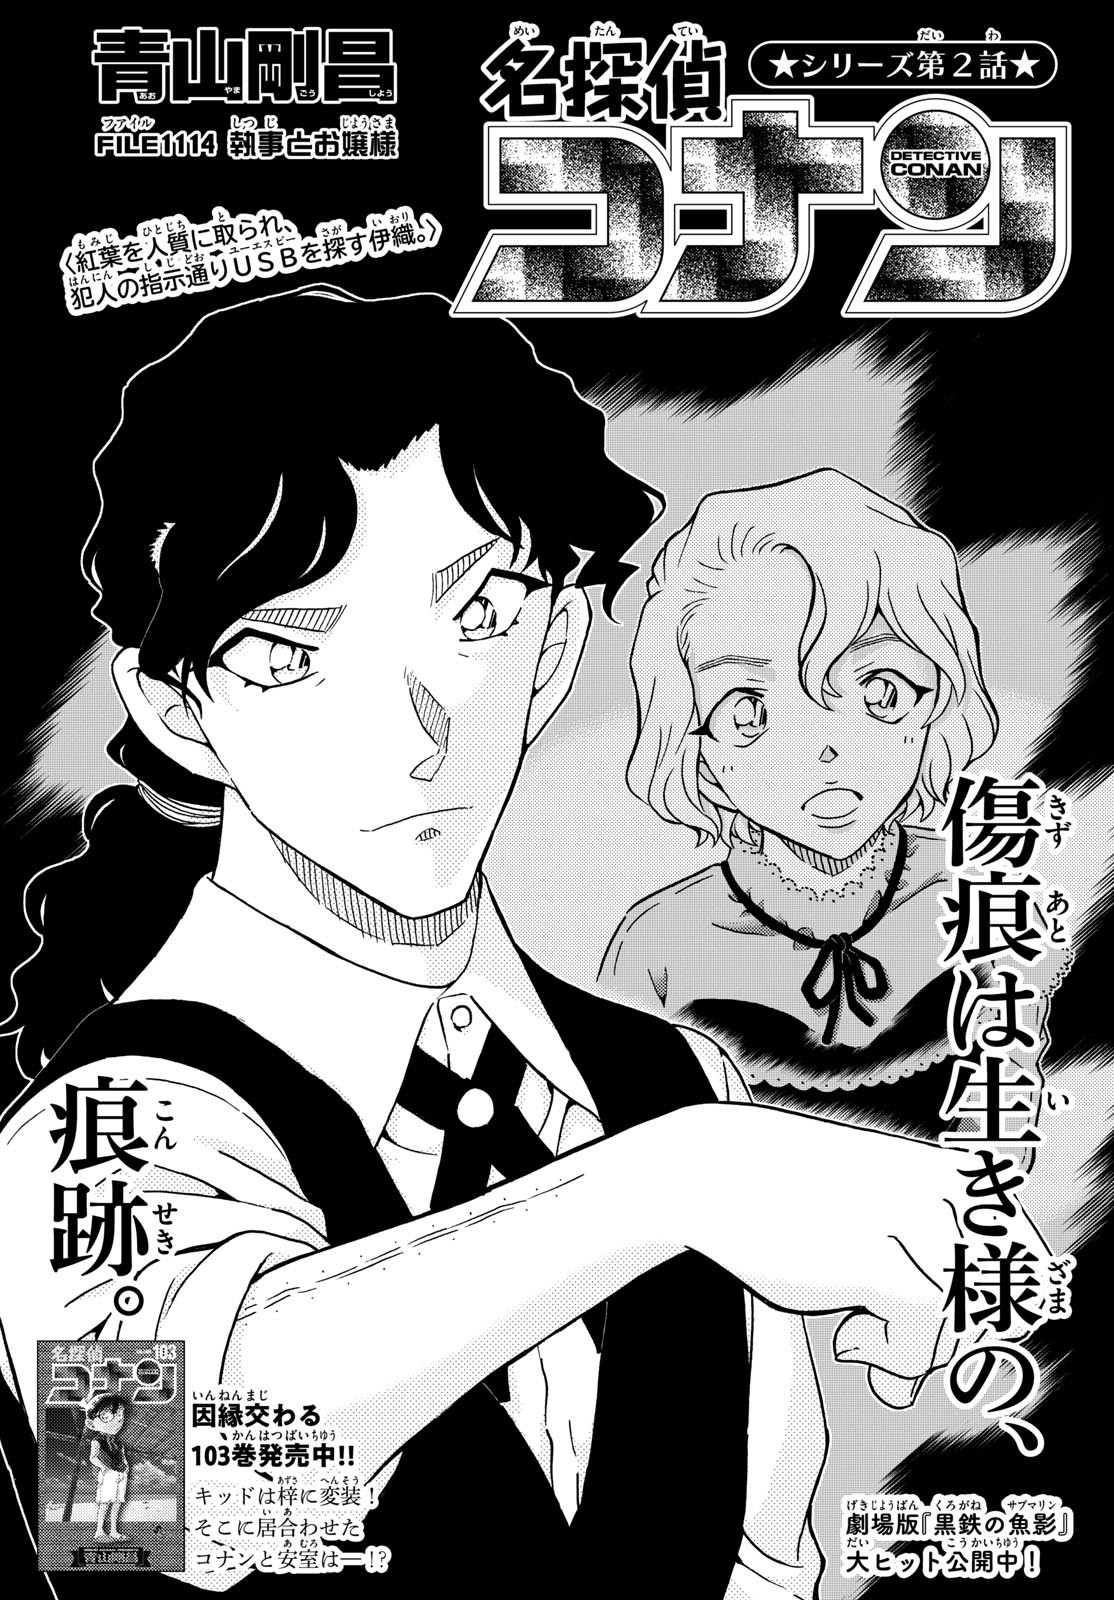 Detective Conan - Chapter 1114 - Page 1